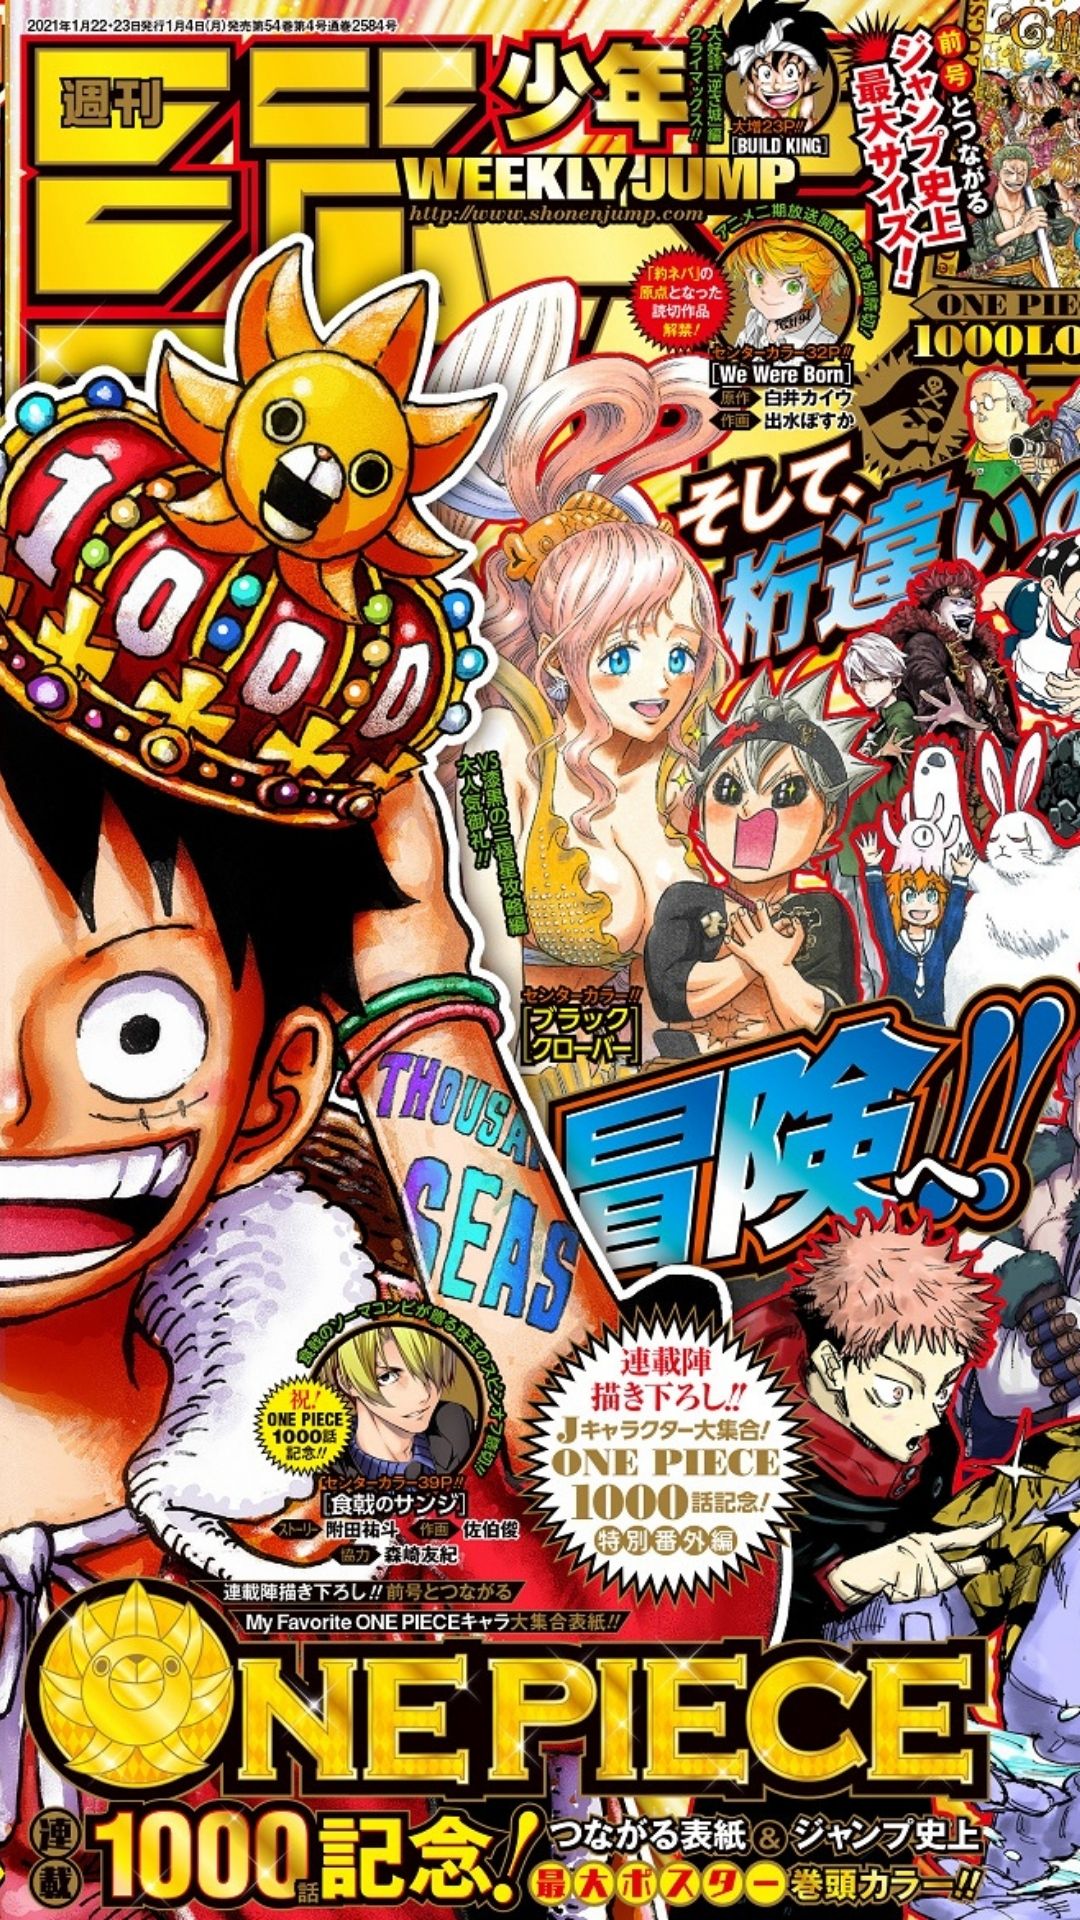 One Piece Promo Releases Volume 99 Volume 100 Set For July